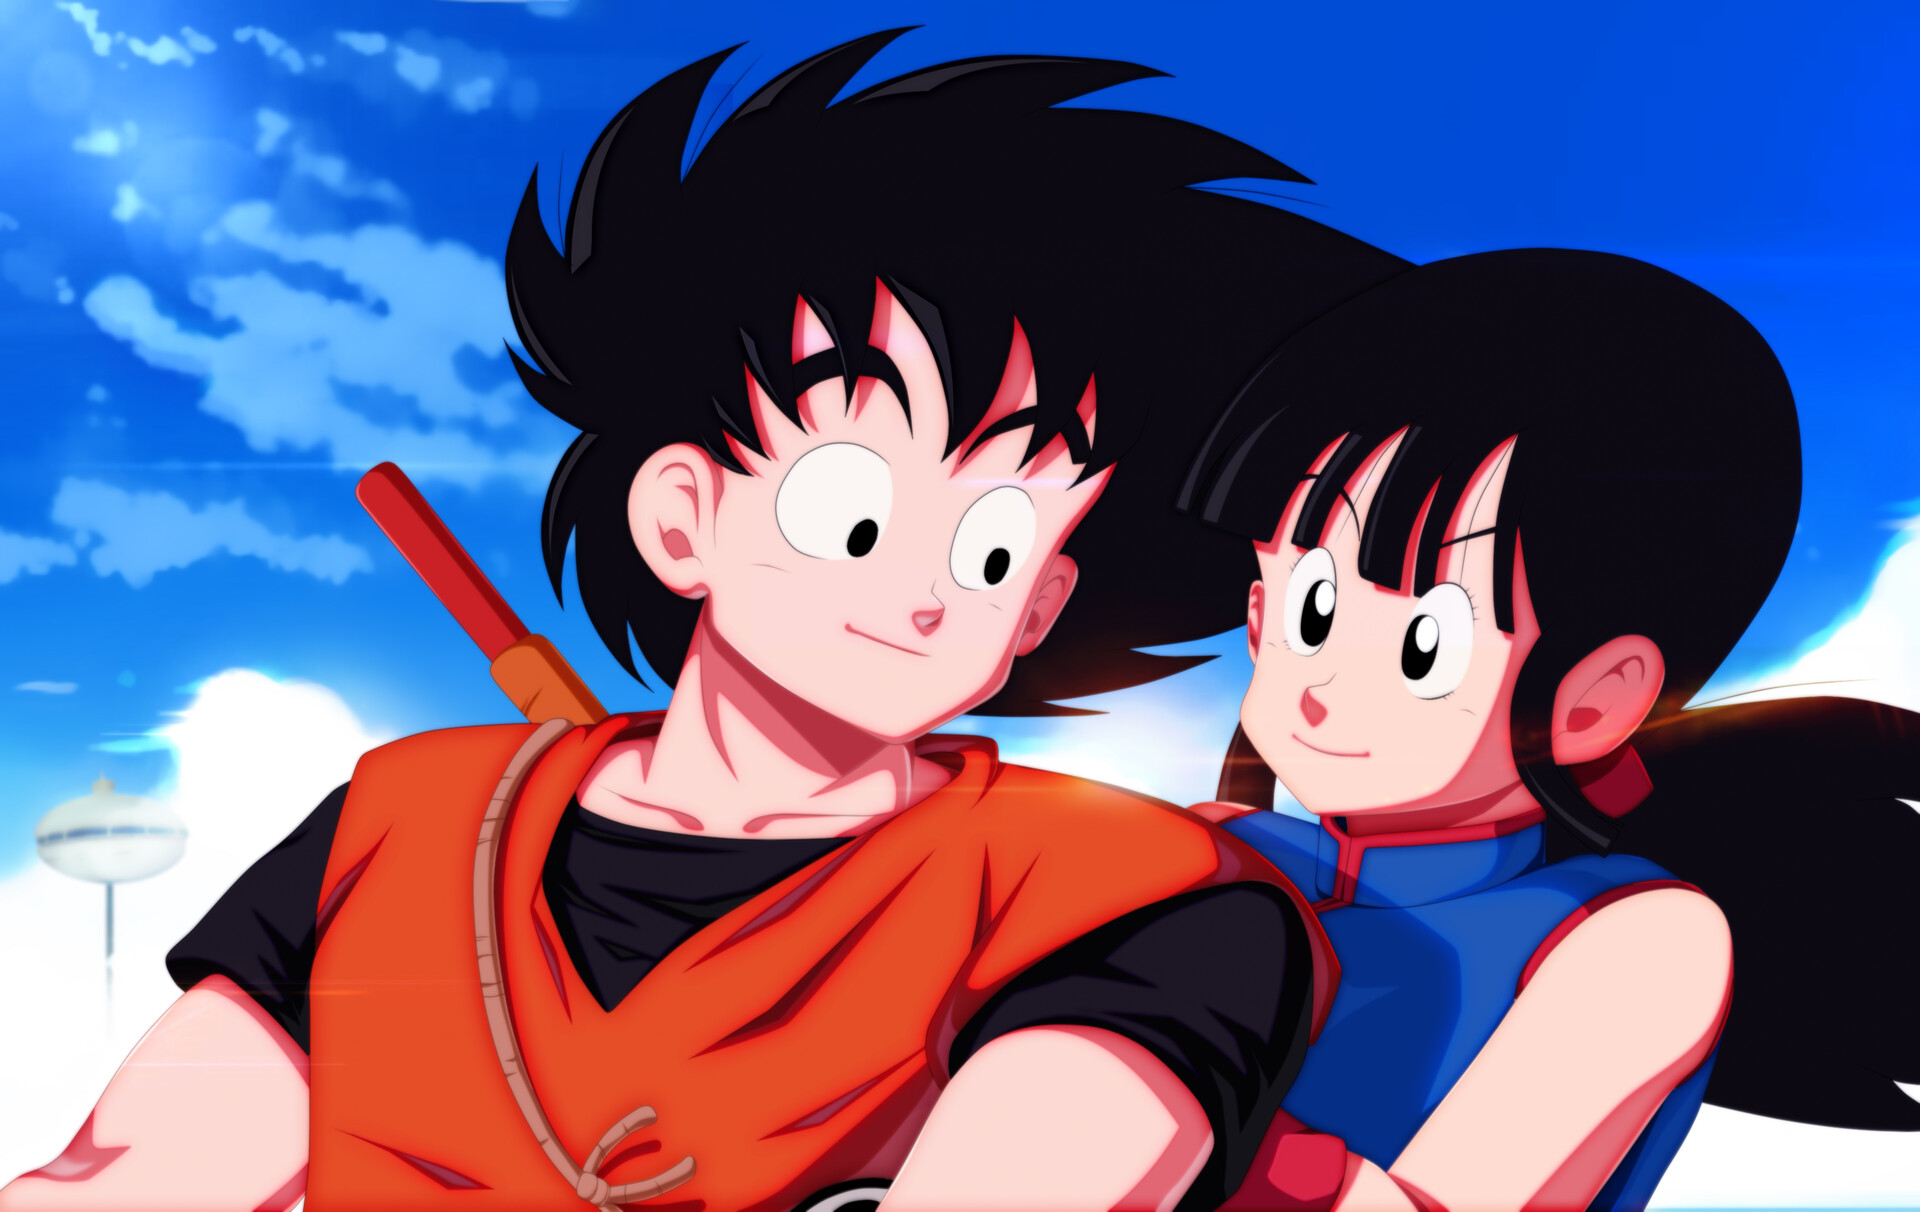 Goku and Chi-Chi, Luis Díaz 童顔.